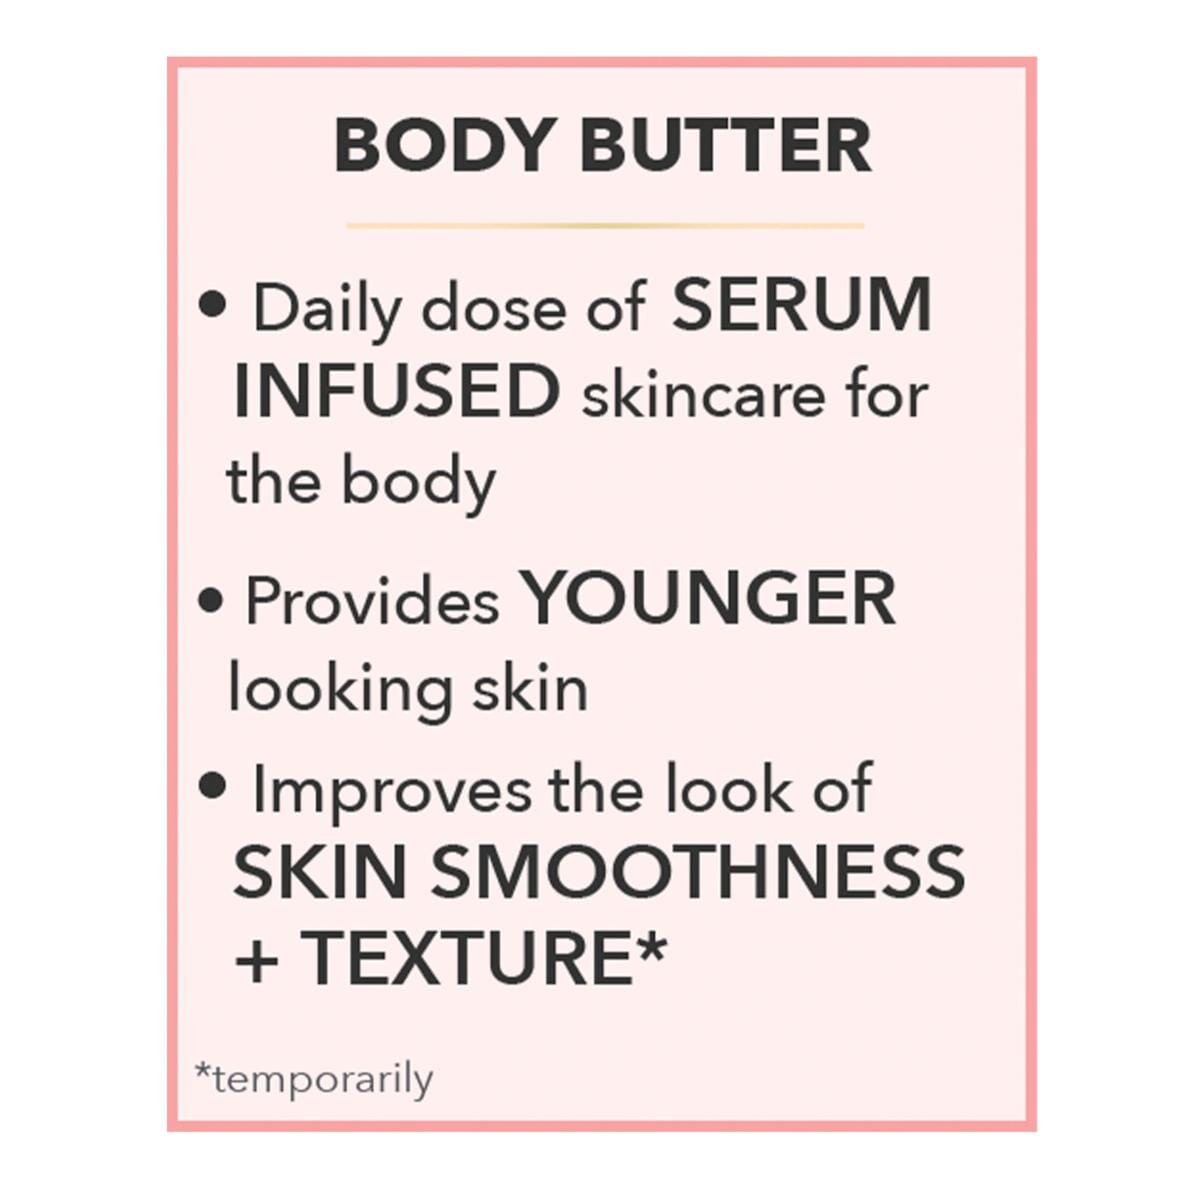 Patented Exclusive Smooth Body Butter👑